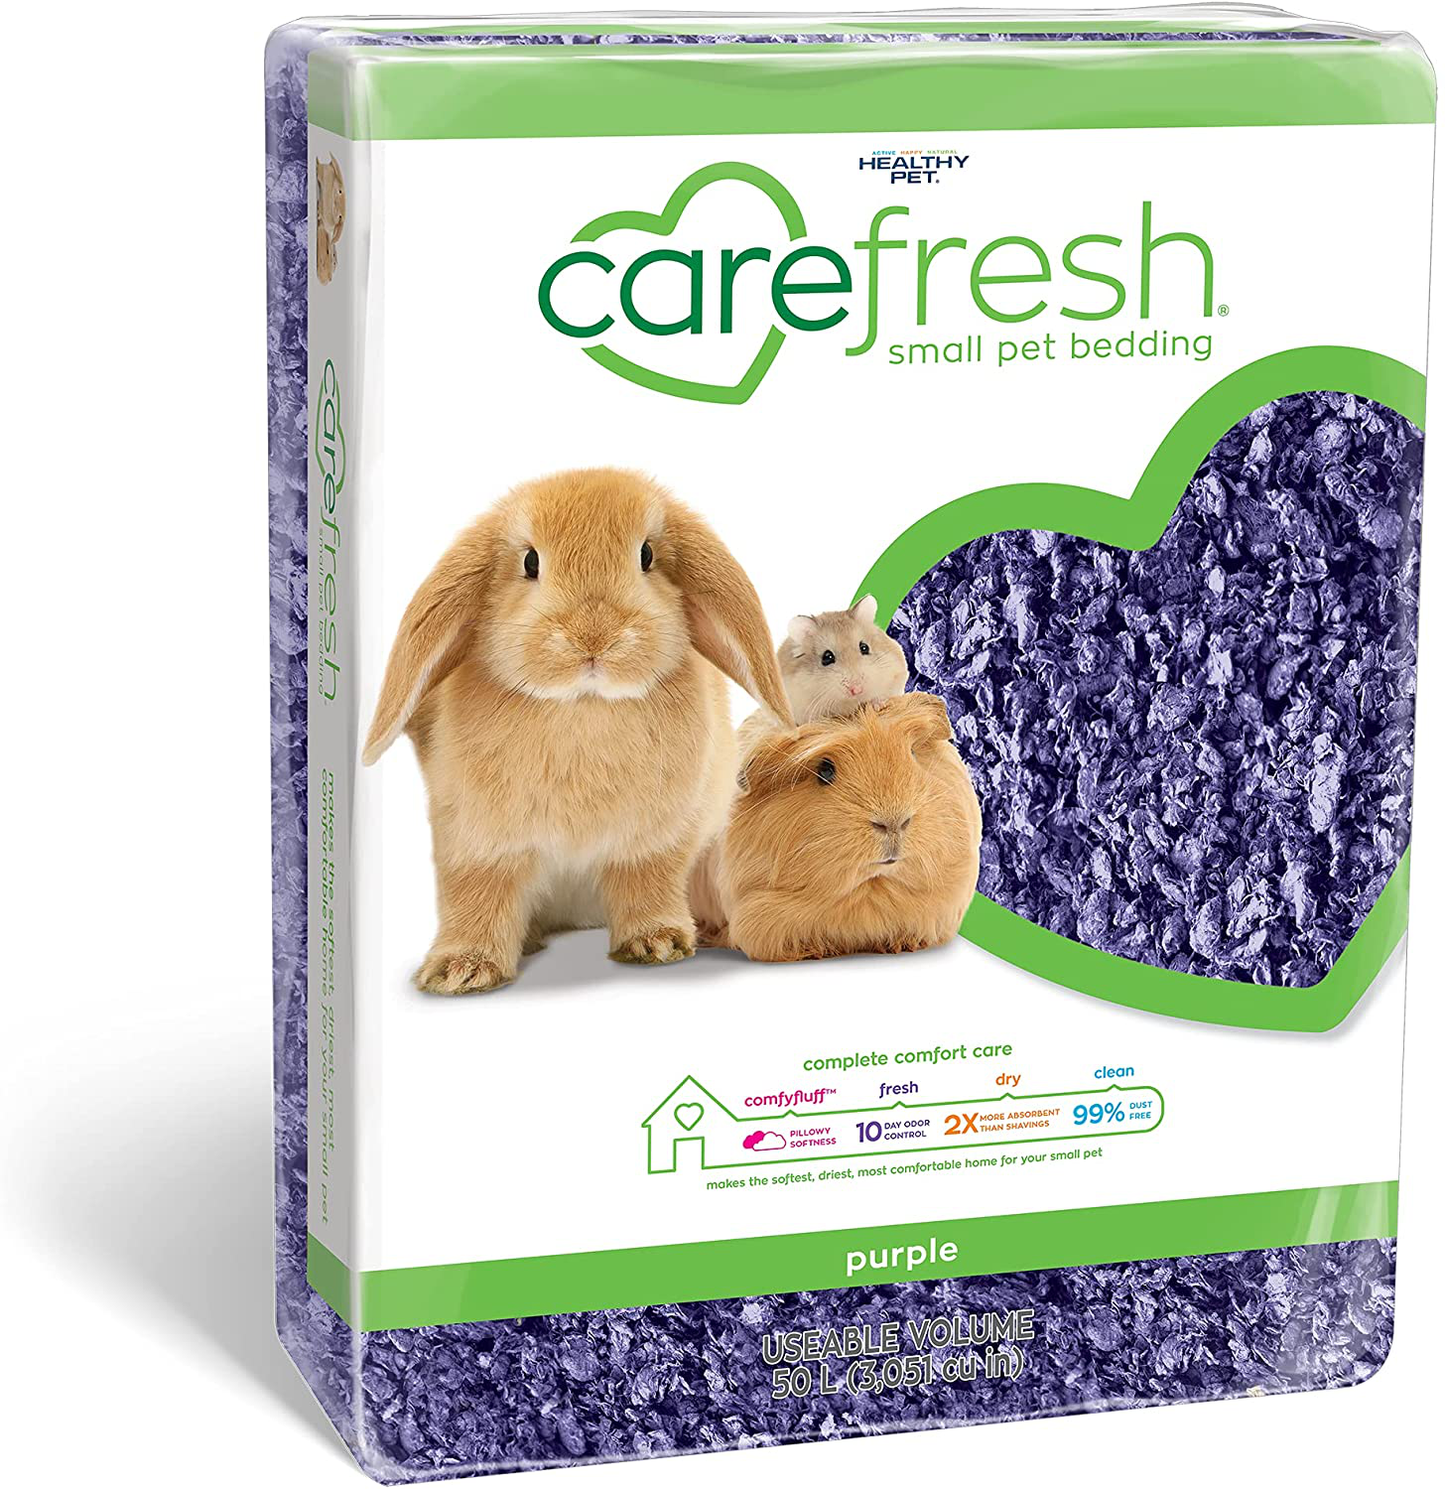 Carefresh 99% Dust-Free Natural Paper Small Pet Bedding with Odor Control Animals & Pet Supplies > Pet Supplies > Small Animal Supplies > Small Animal Bedding Carefresh purple 50L 